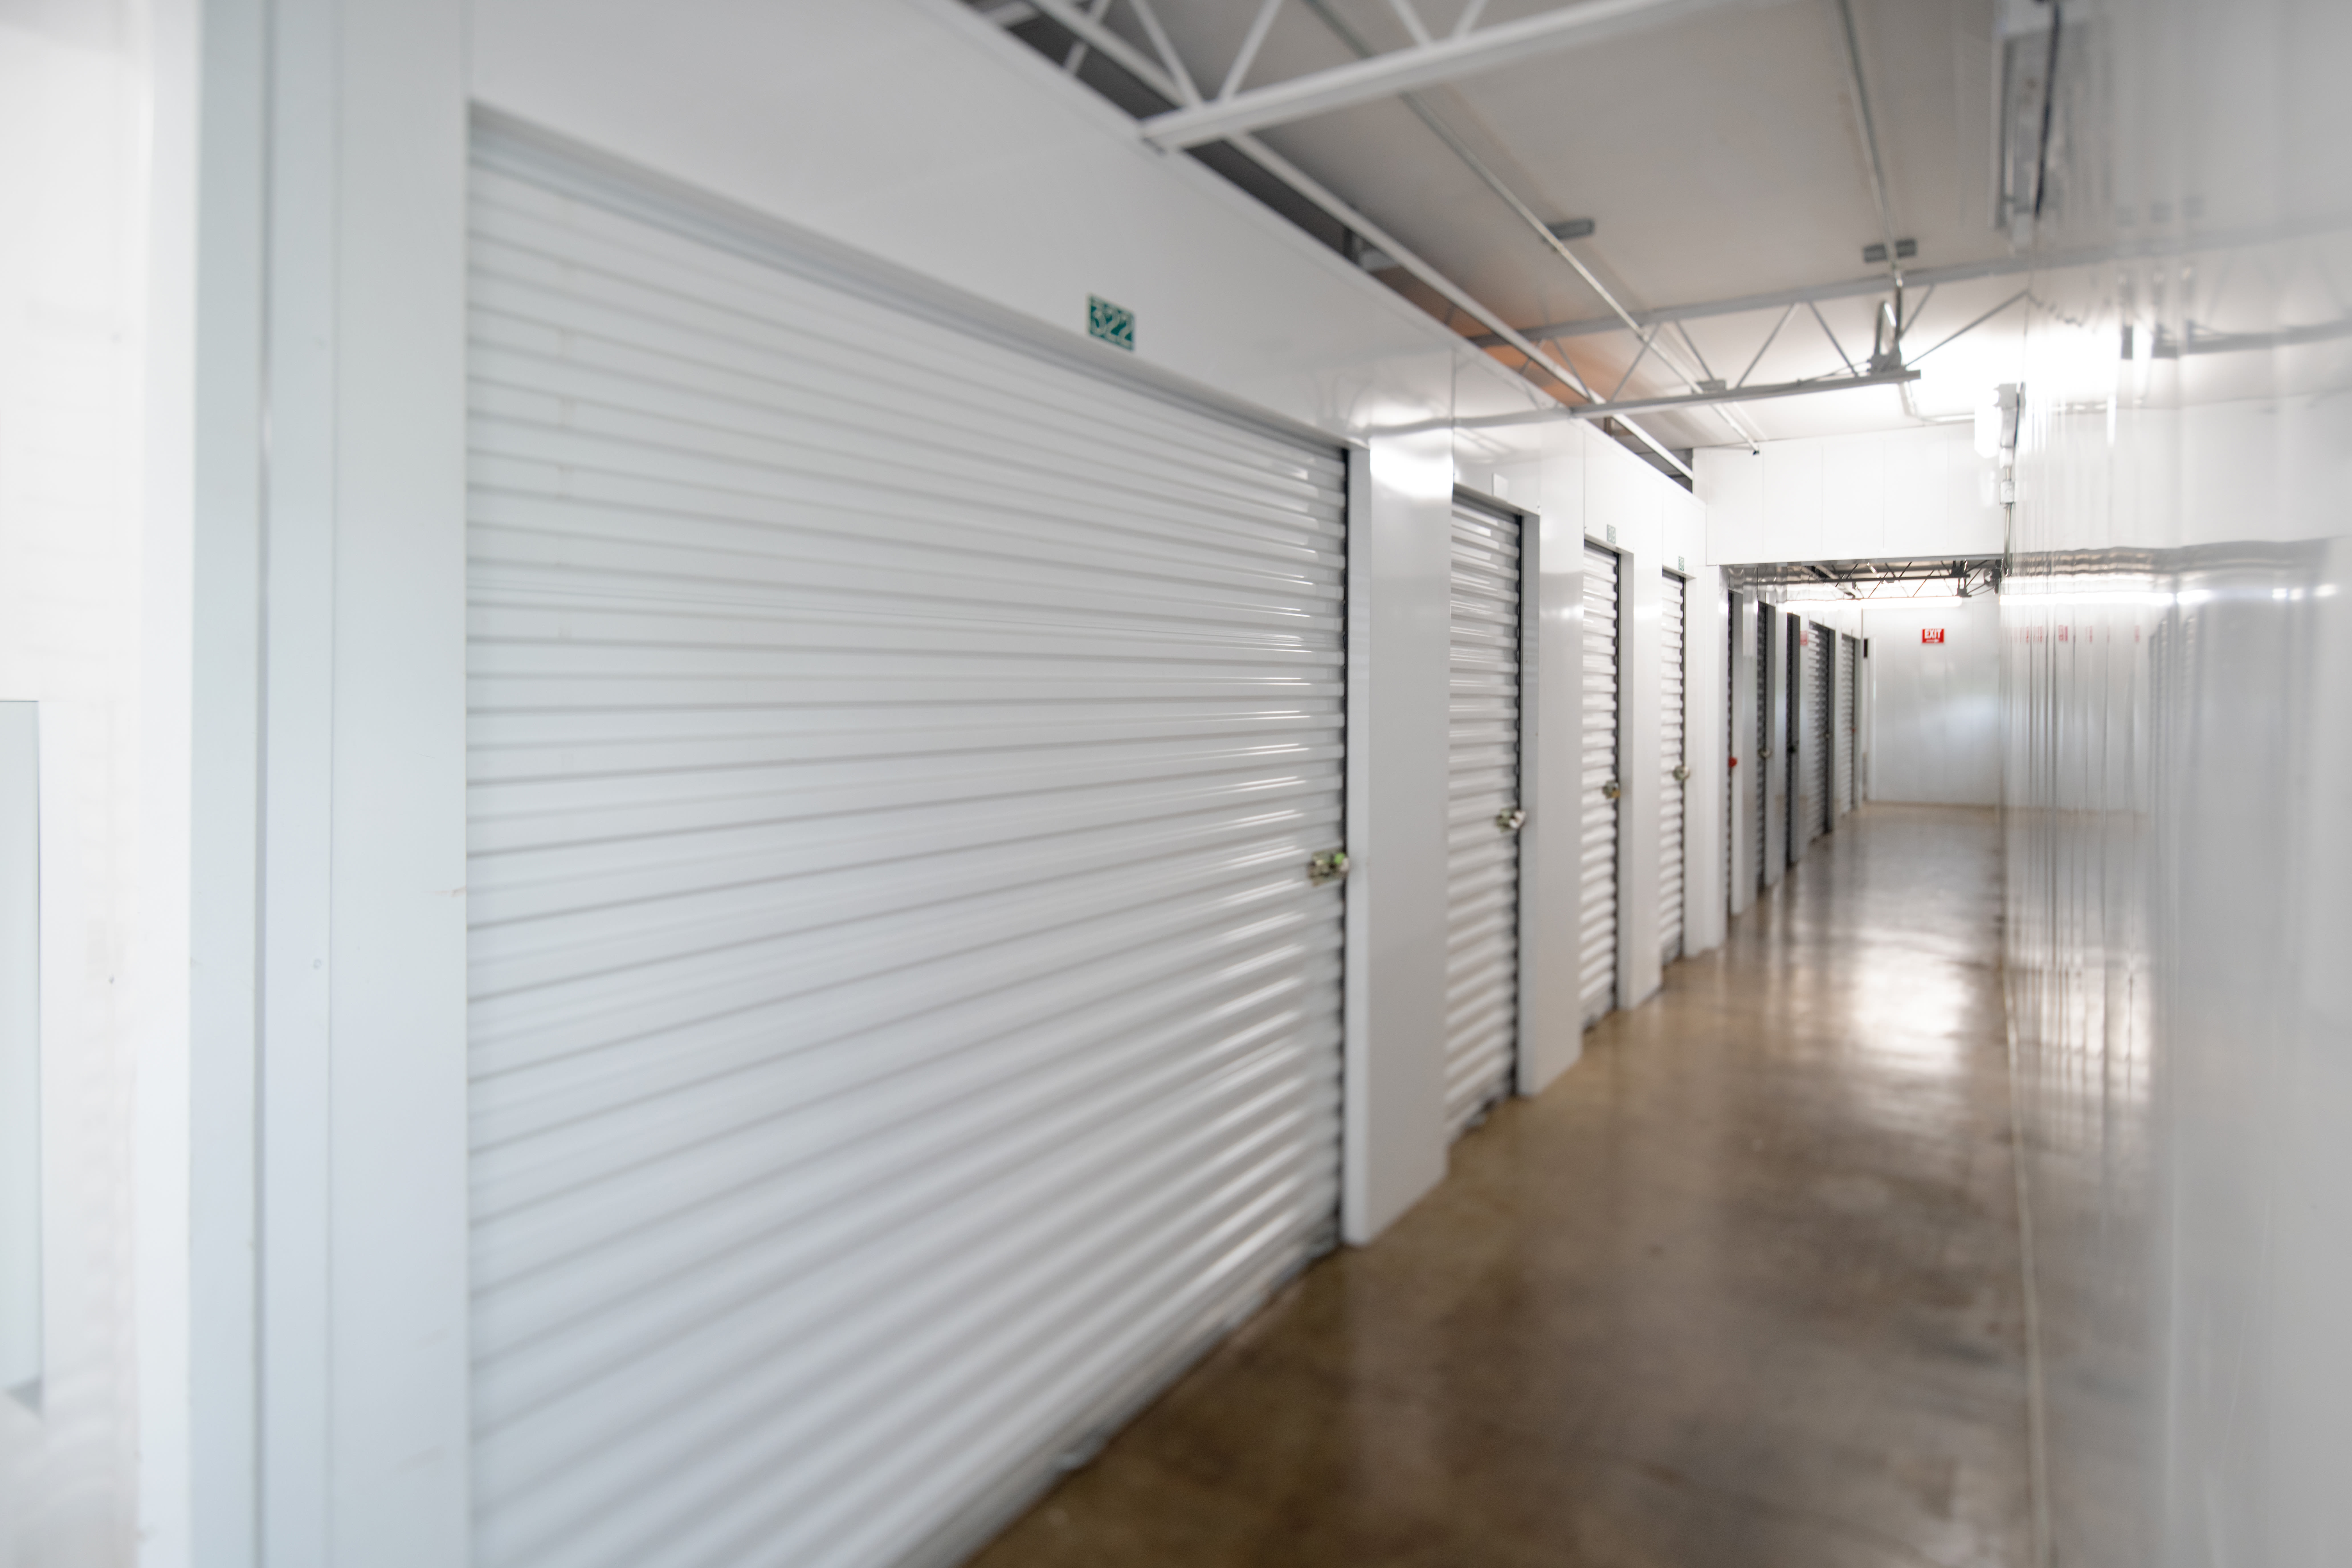 Hallway for multiple self-storage at Citizen Storage in Memphis, Tennessee